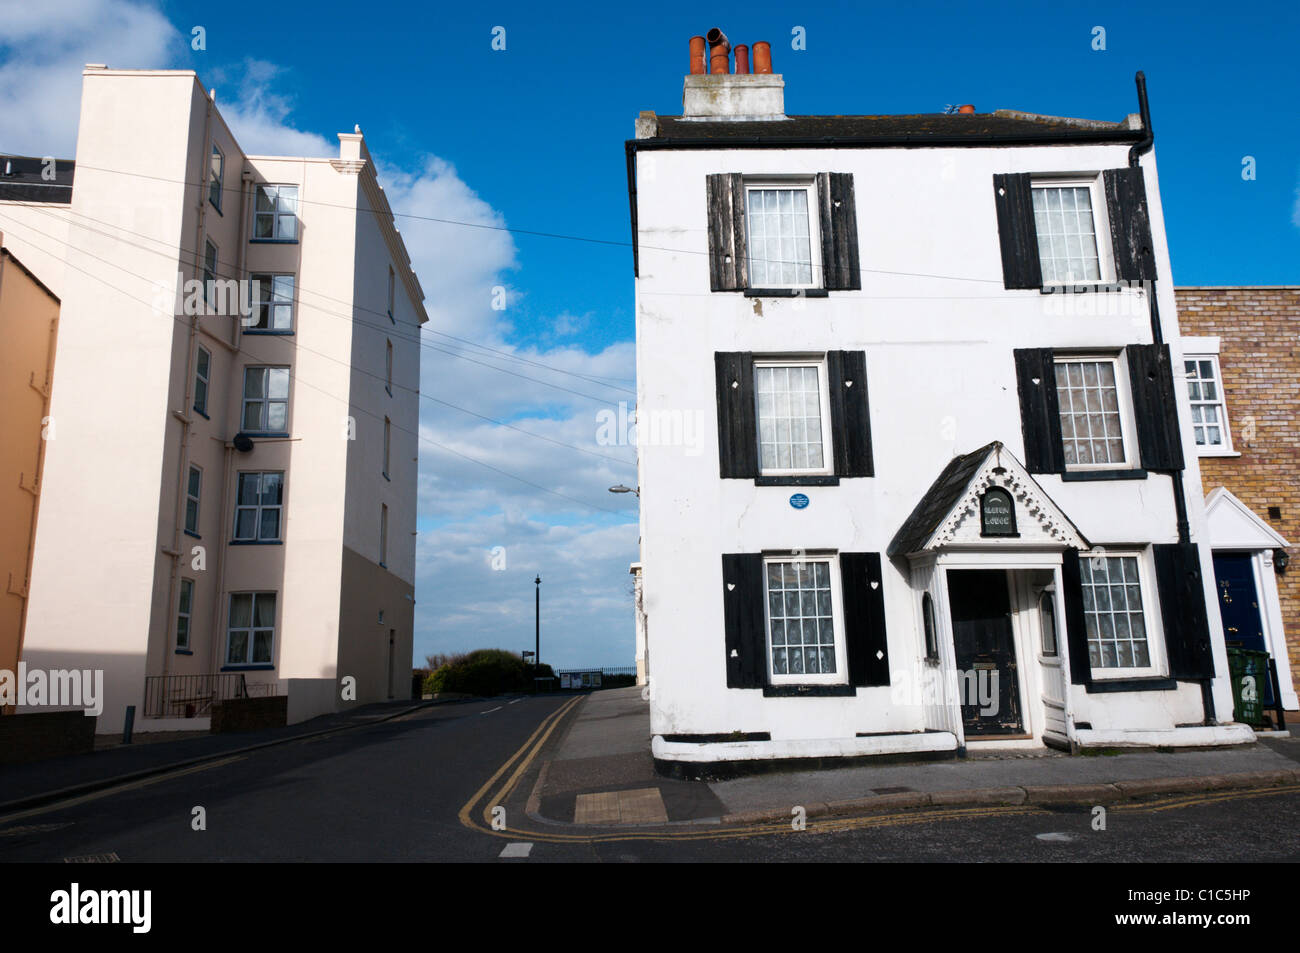 The white building on the right (Albion Lodge) was the home in Margate of John Le Mesurier and Hattie Jacques during the 1960s. Stock Photo